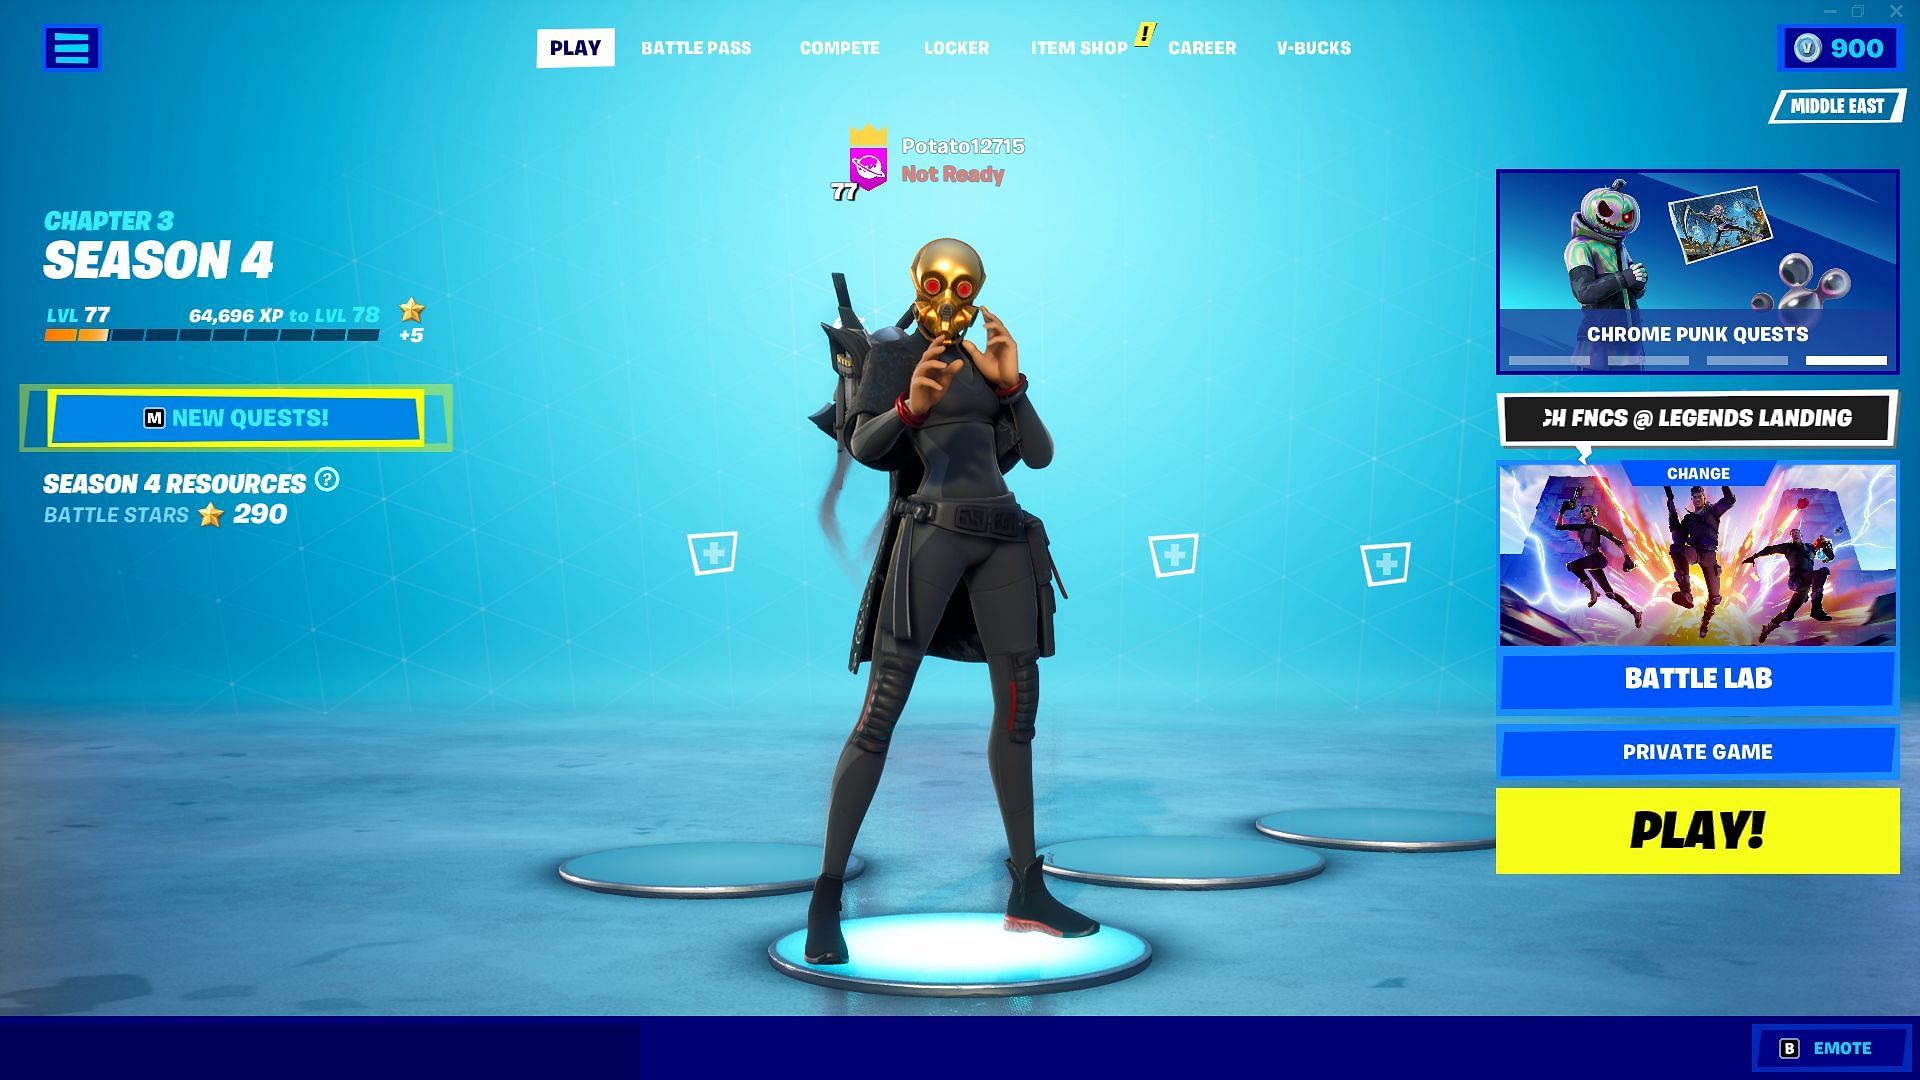 The account level can be seen on the left side of the screen (Image via Epic Games)